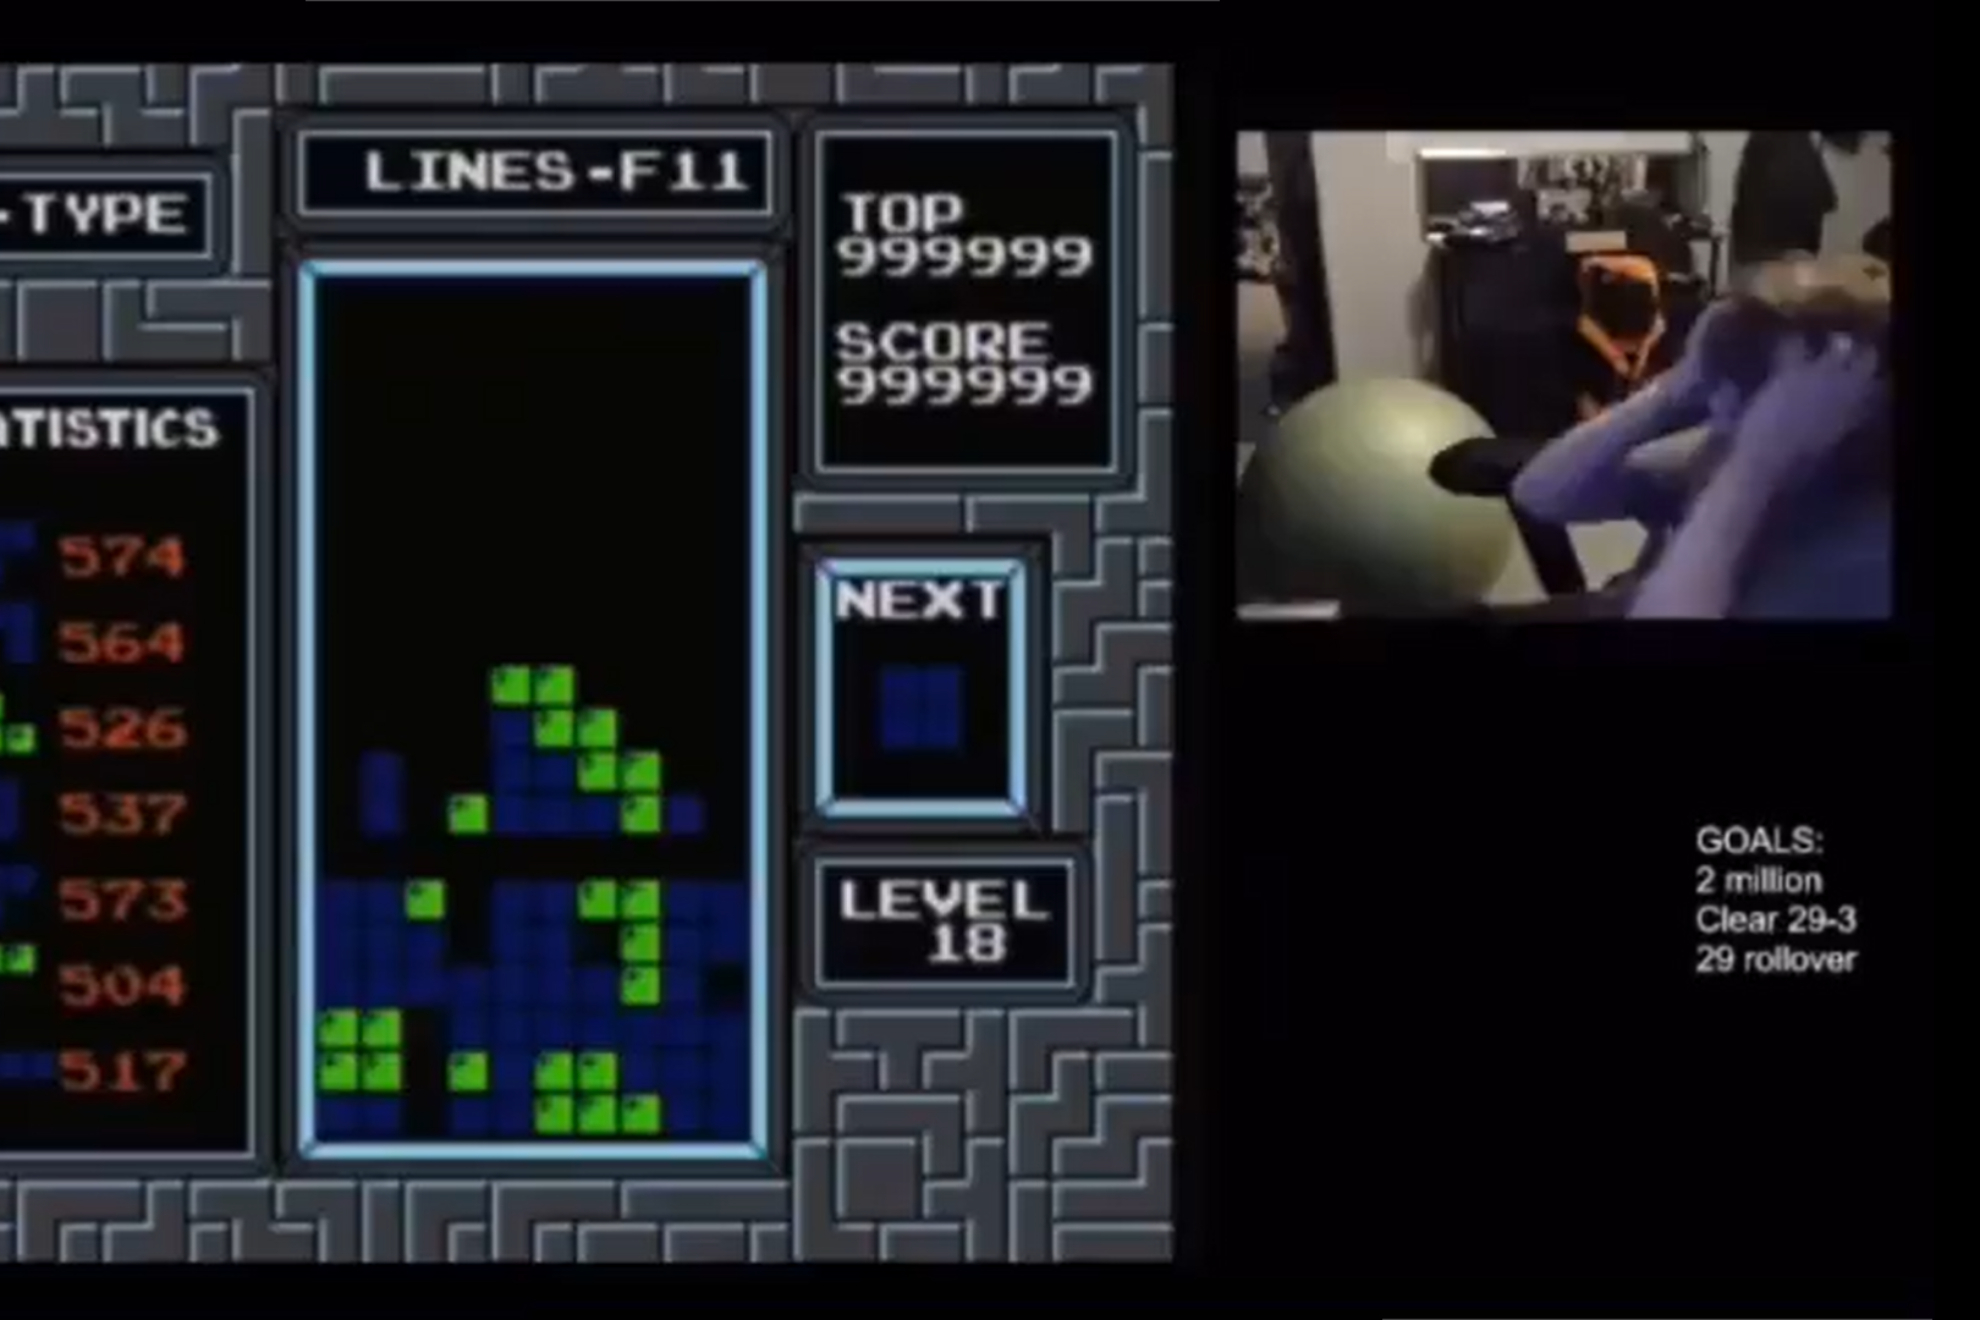 Thirteen-year-old Oklahoma boy becomes the first person to reach the end of Tetris